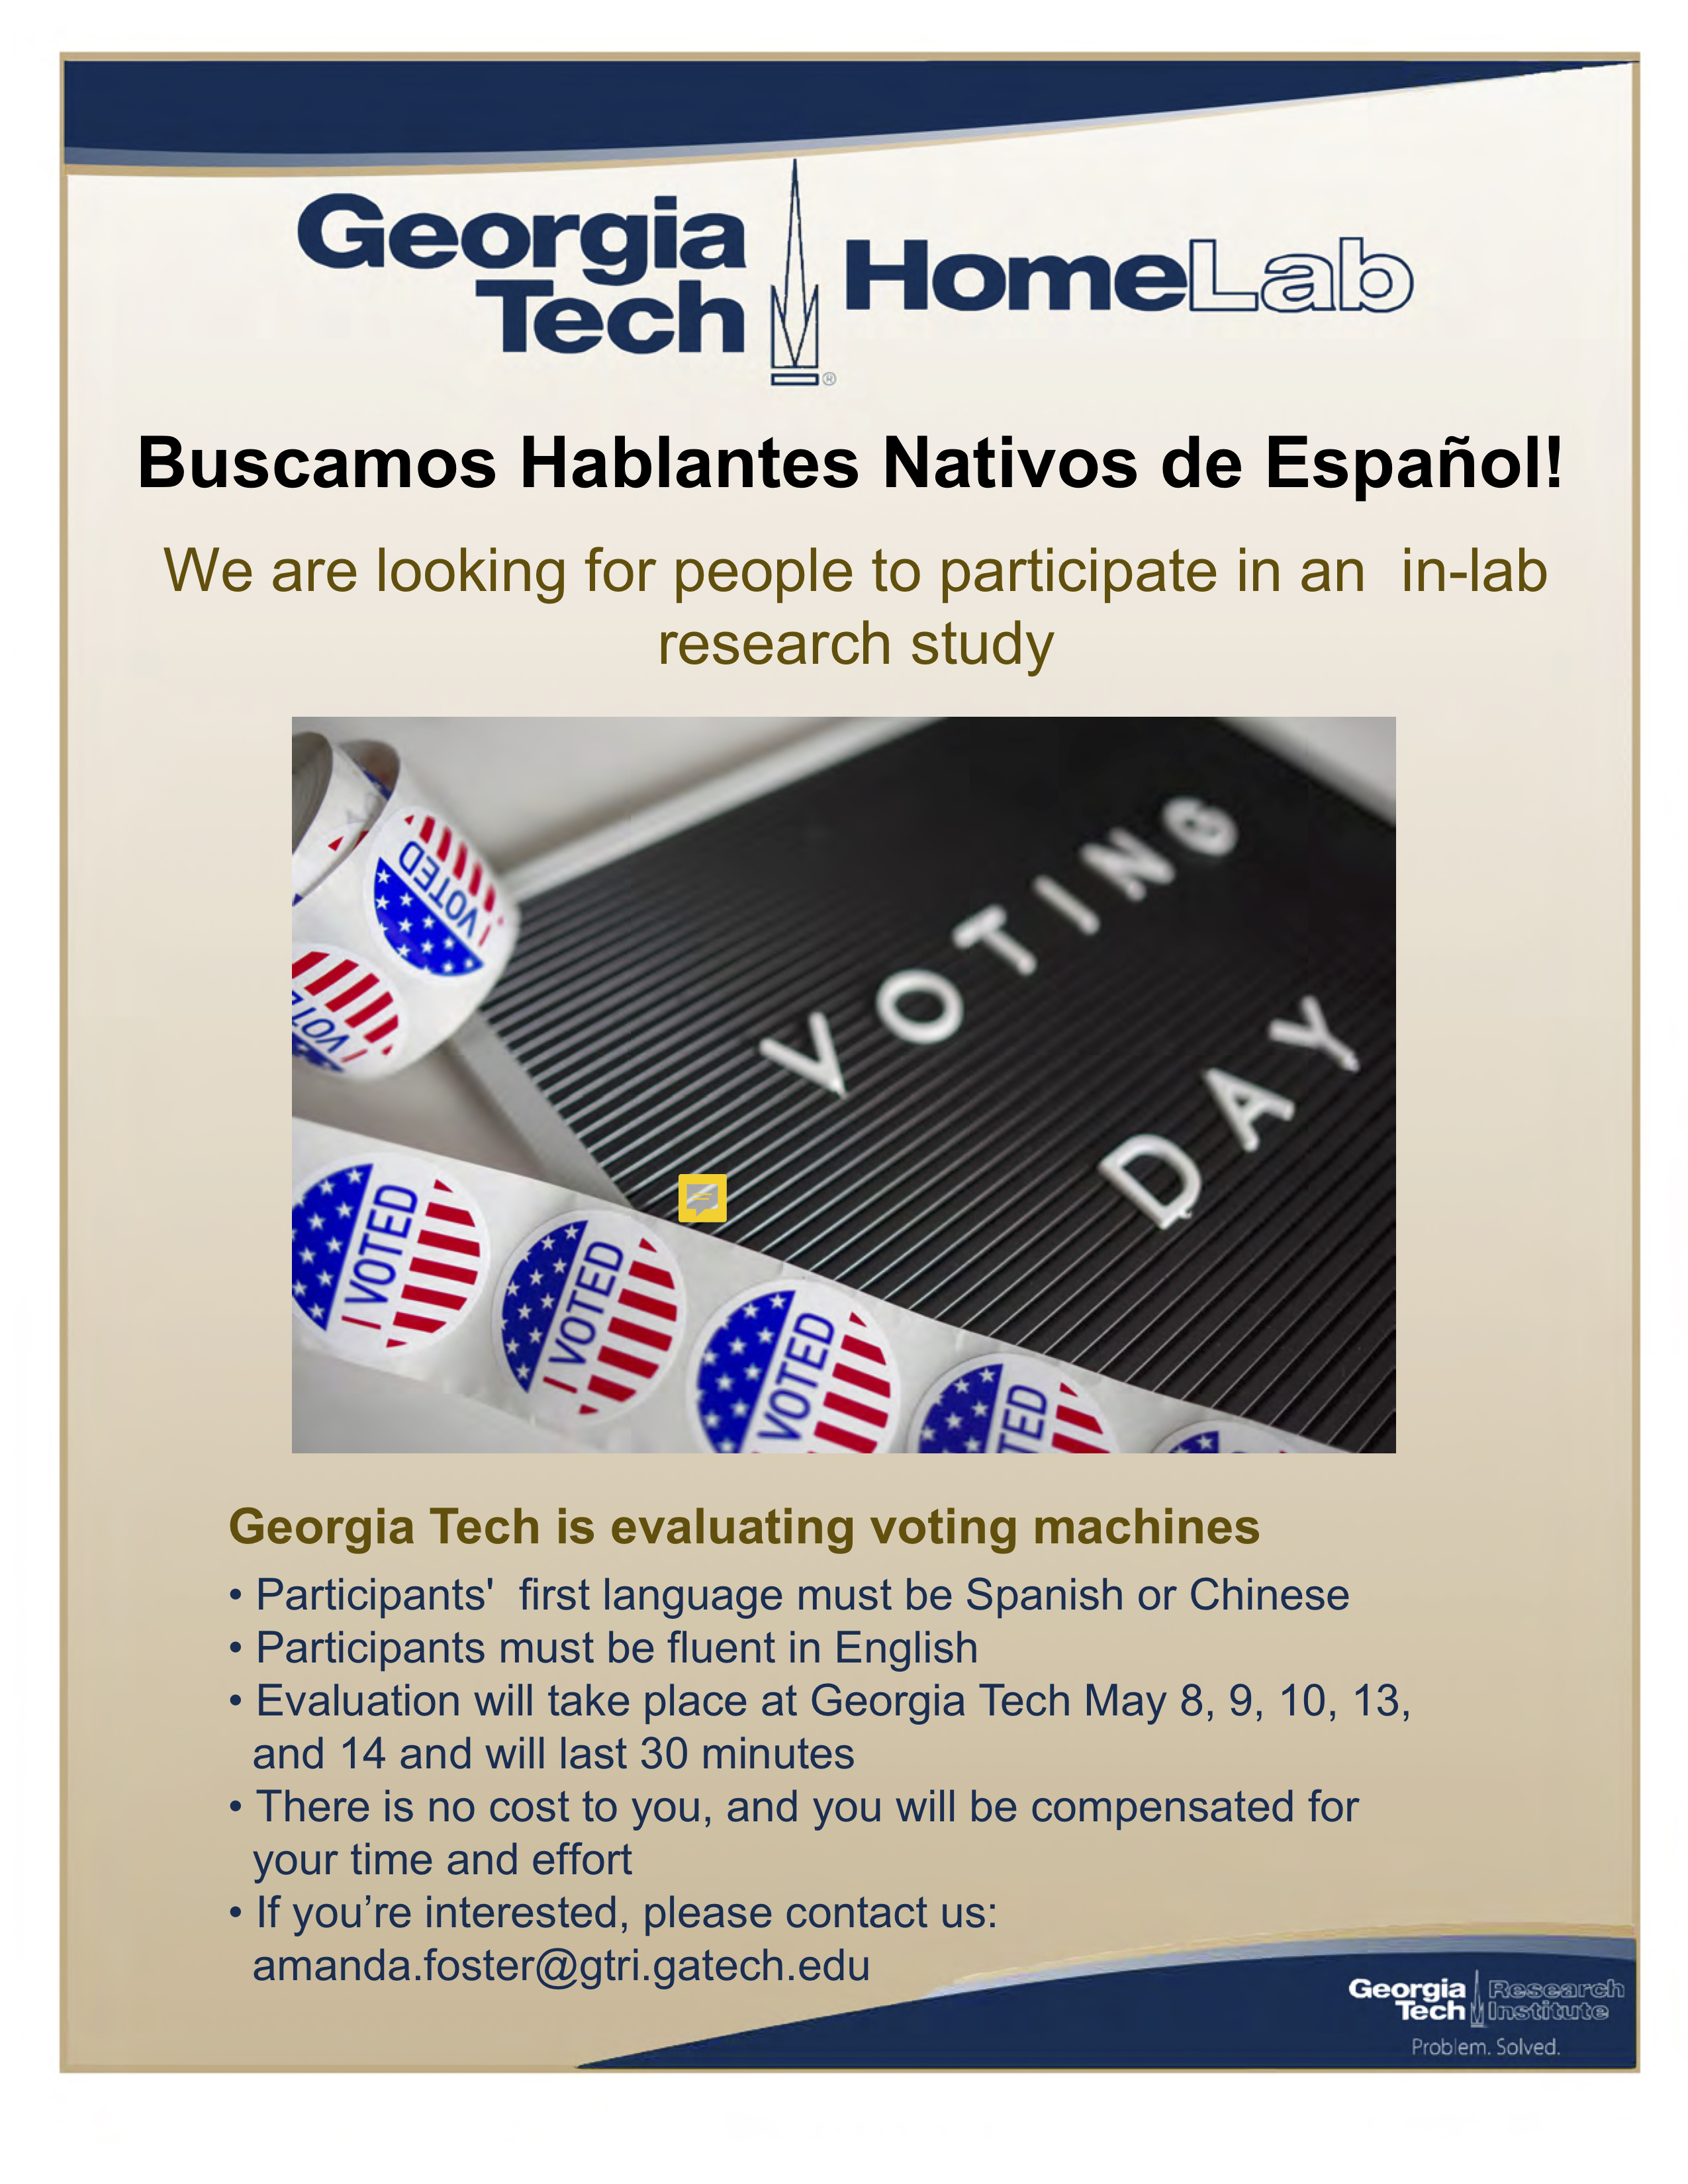 Buscamos Hablantes Nativos de Español! We are looking for people to participate in an in-lab research study  Georgia Tech is evaluating voting machines • Participants' first language must be Spanish or Chinese • Participants must be fluent in English • Evaluation will take place at Georgia Tech May 8, 9, 10, 13, and 14 and will last 30 minutes • There is no cost to you, and you will be compensated for your time and effort • If you’re interested, please contact us: amanda.foster@gtri.gatech.edu